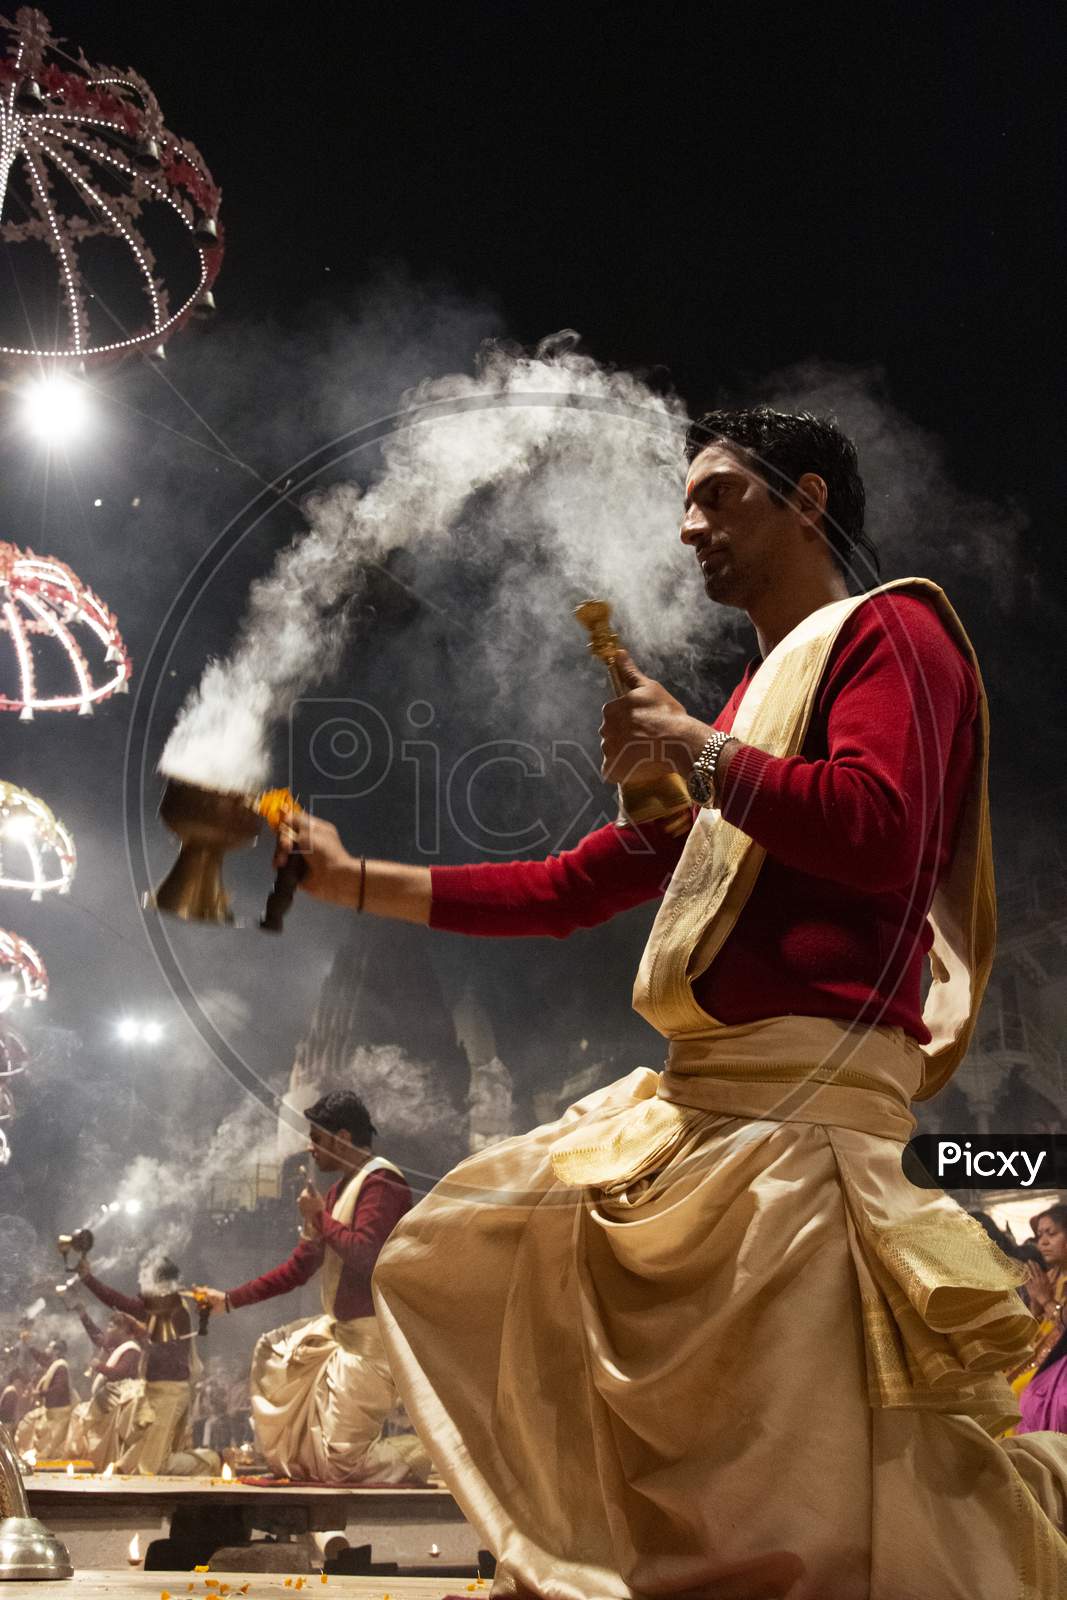 Varanasi, India, 23.01.18 : Evening Ganga Aarti on the banks of river Ganges. Indian Hindu culture and religion